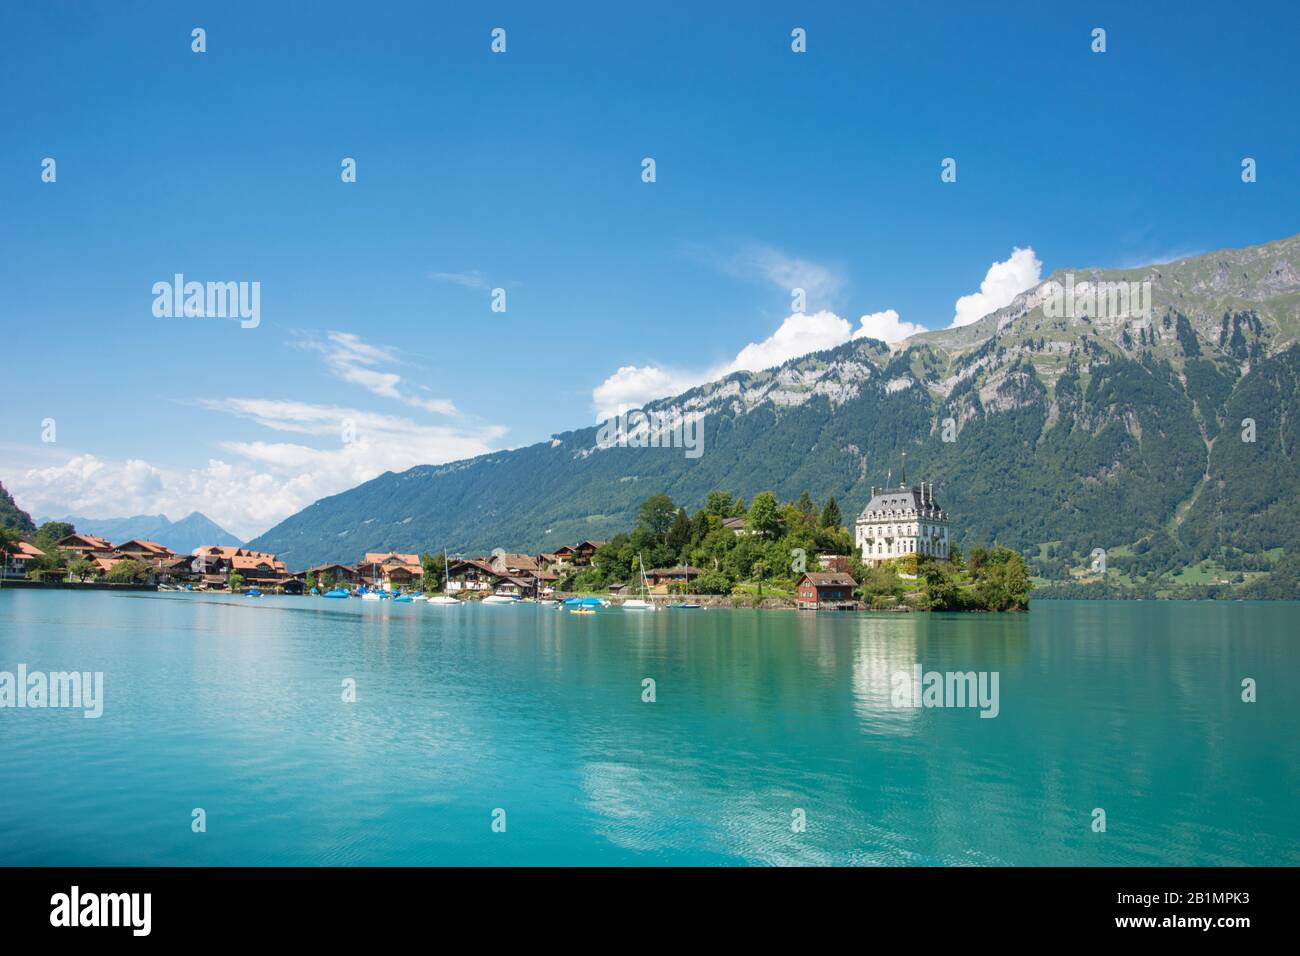 Iseltwald at Lake Brienz in the Bernese Alps / Switzerland Stock Photo